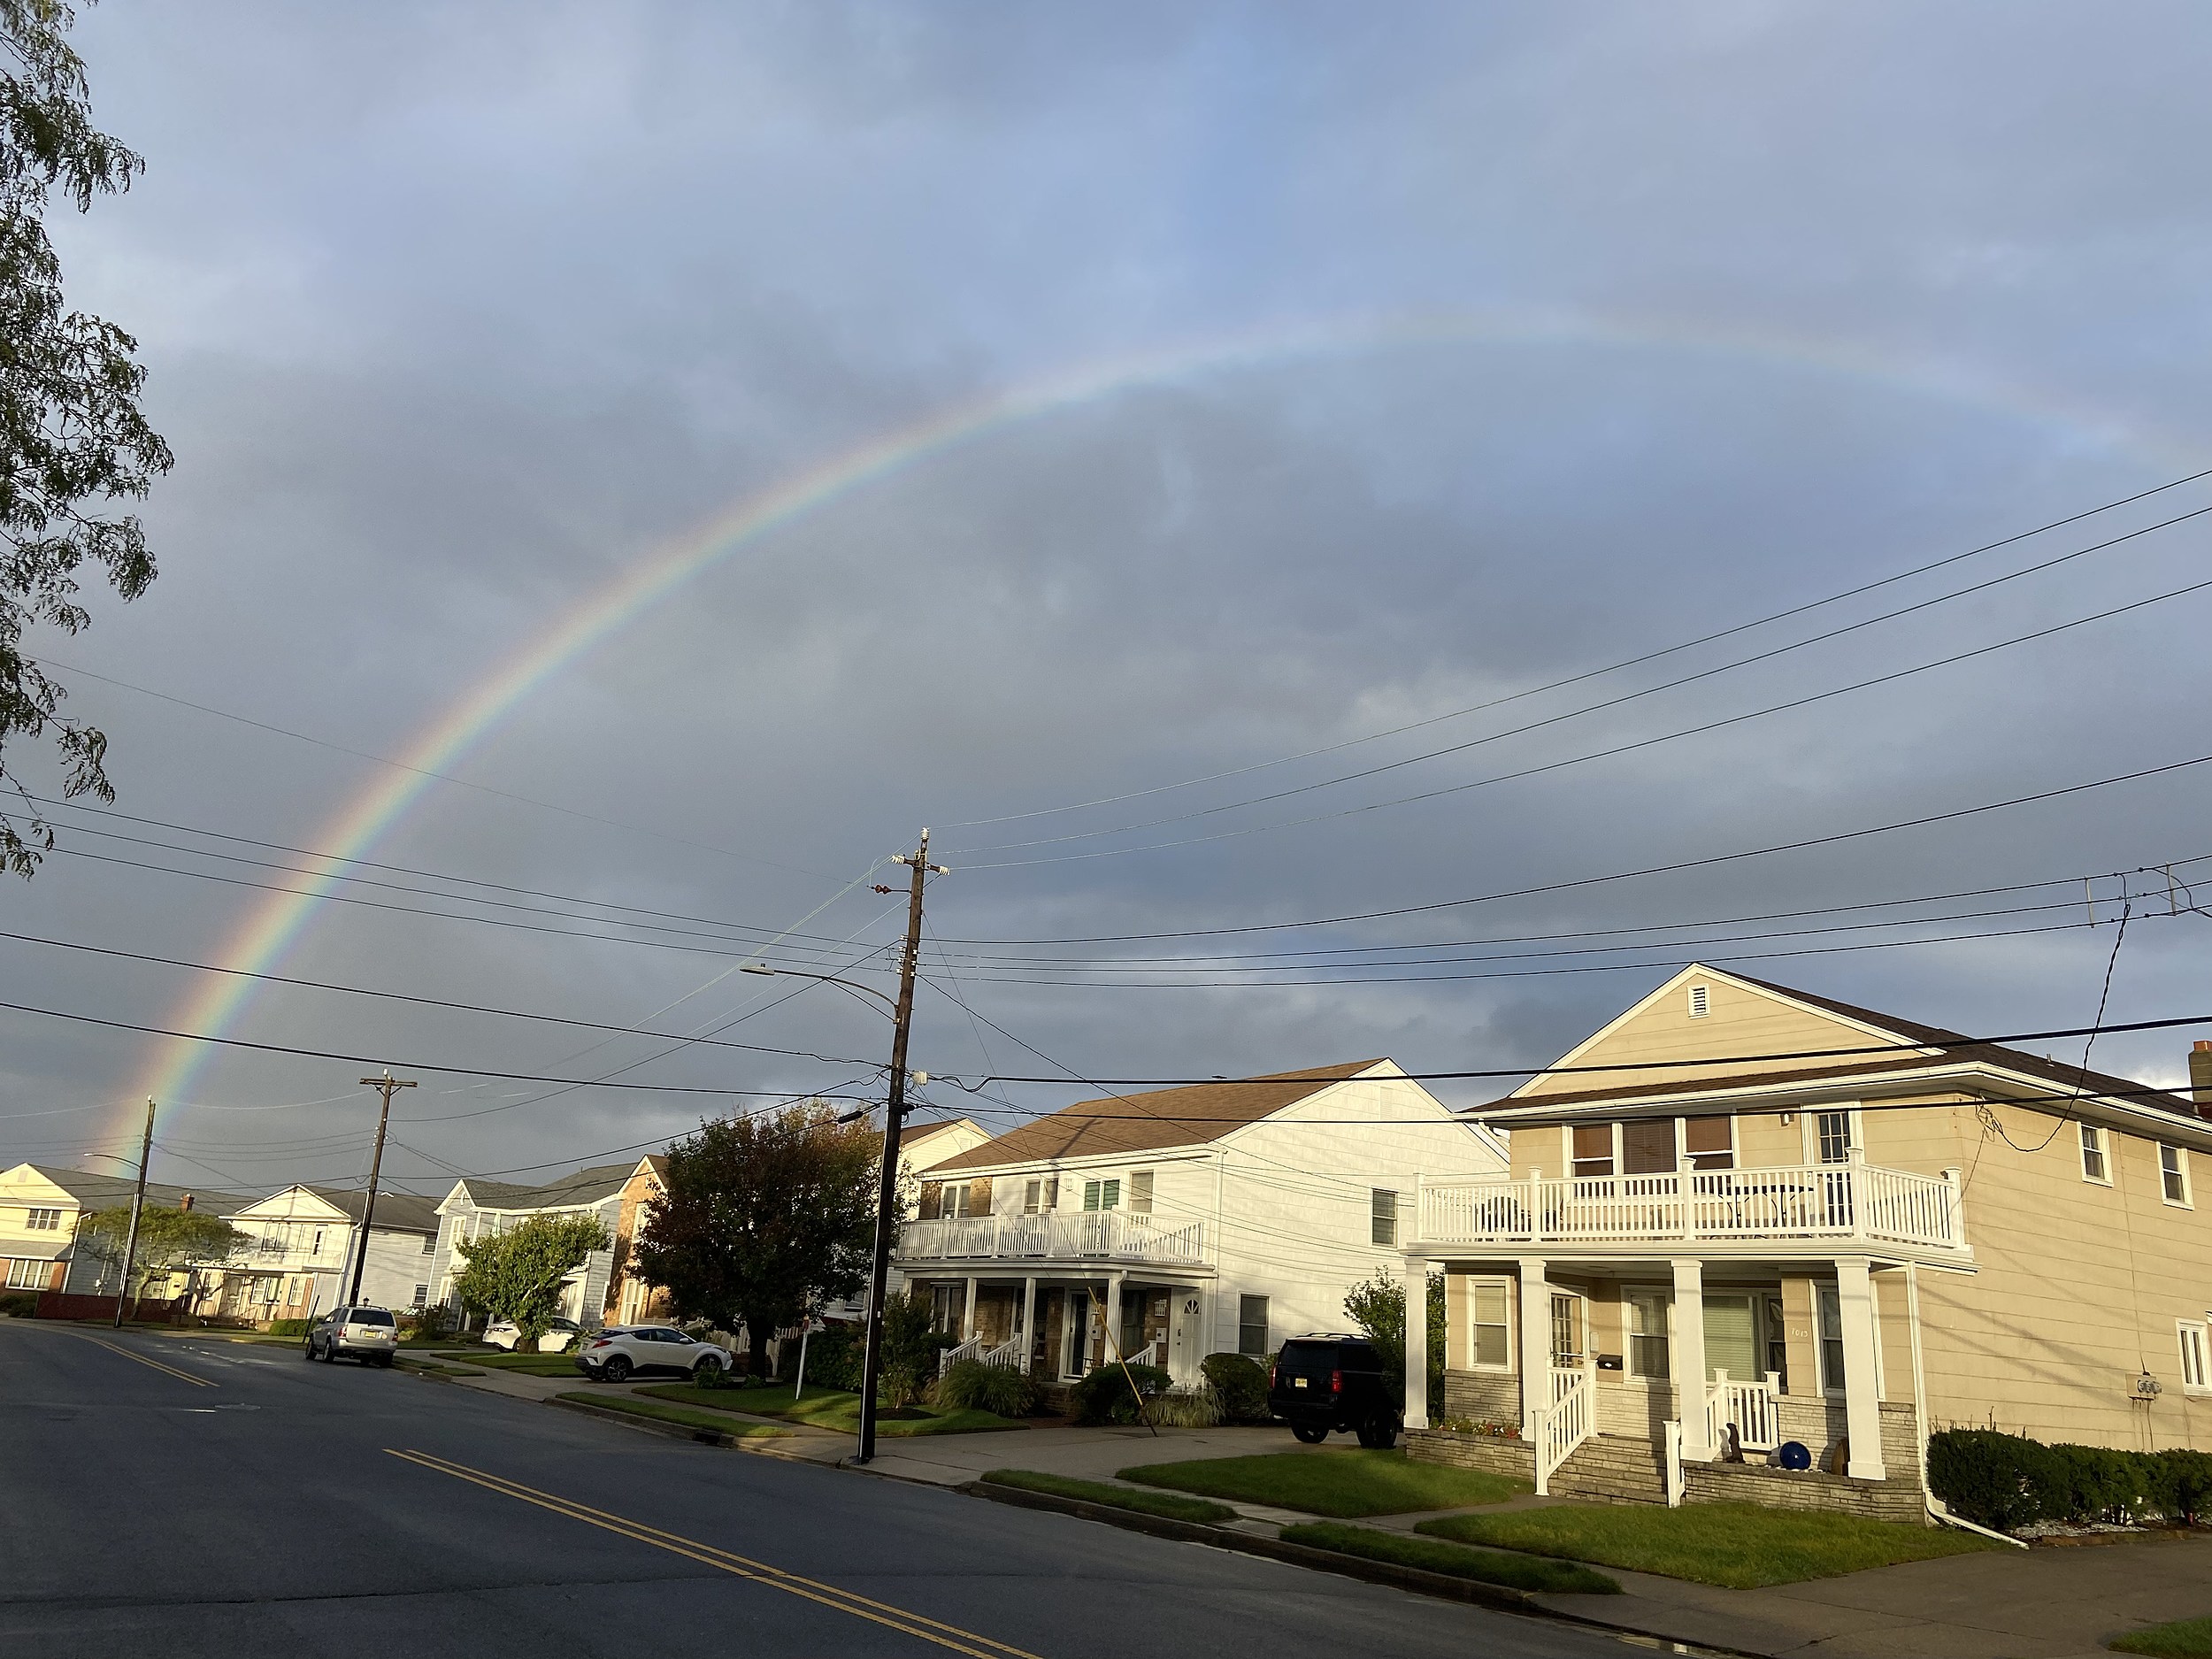 Spectacular rainbow lights up the sky over New Jersey